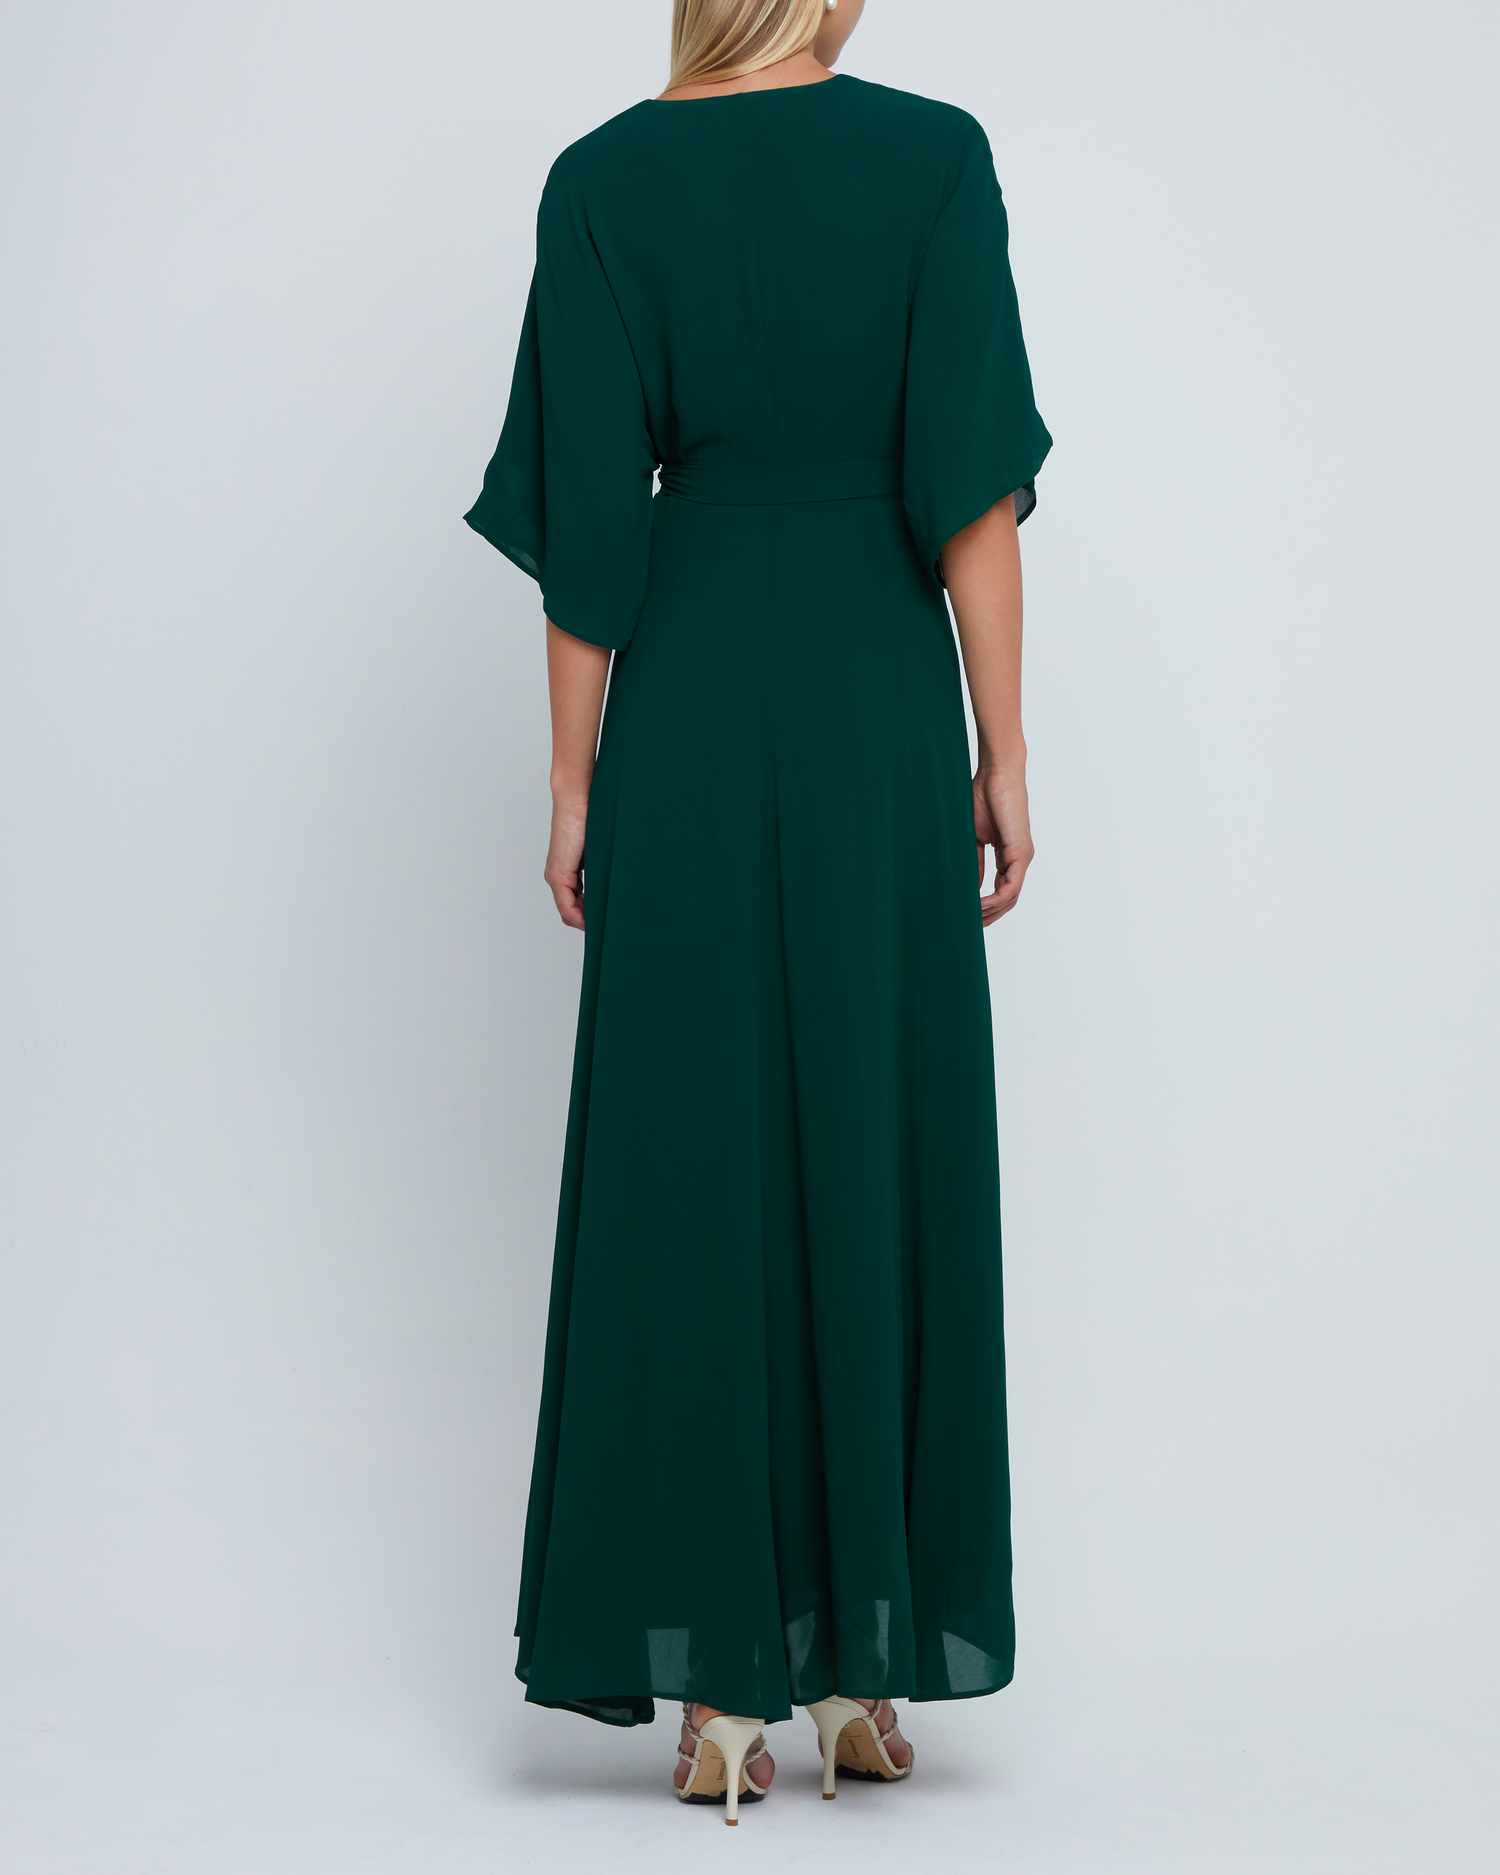 Fourth image of Artie Dress, a green long maxi wrap style bridesmaid dress with flutter sleeves, v-neckline, adjustable waist tie, lining, and dart detail on bodice